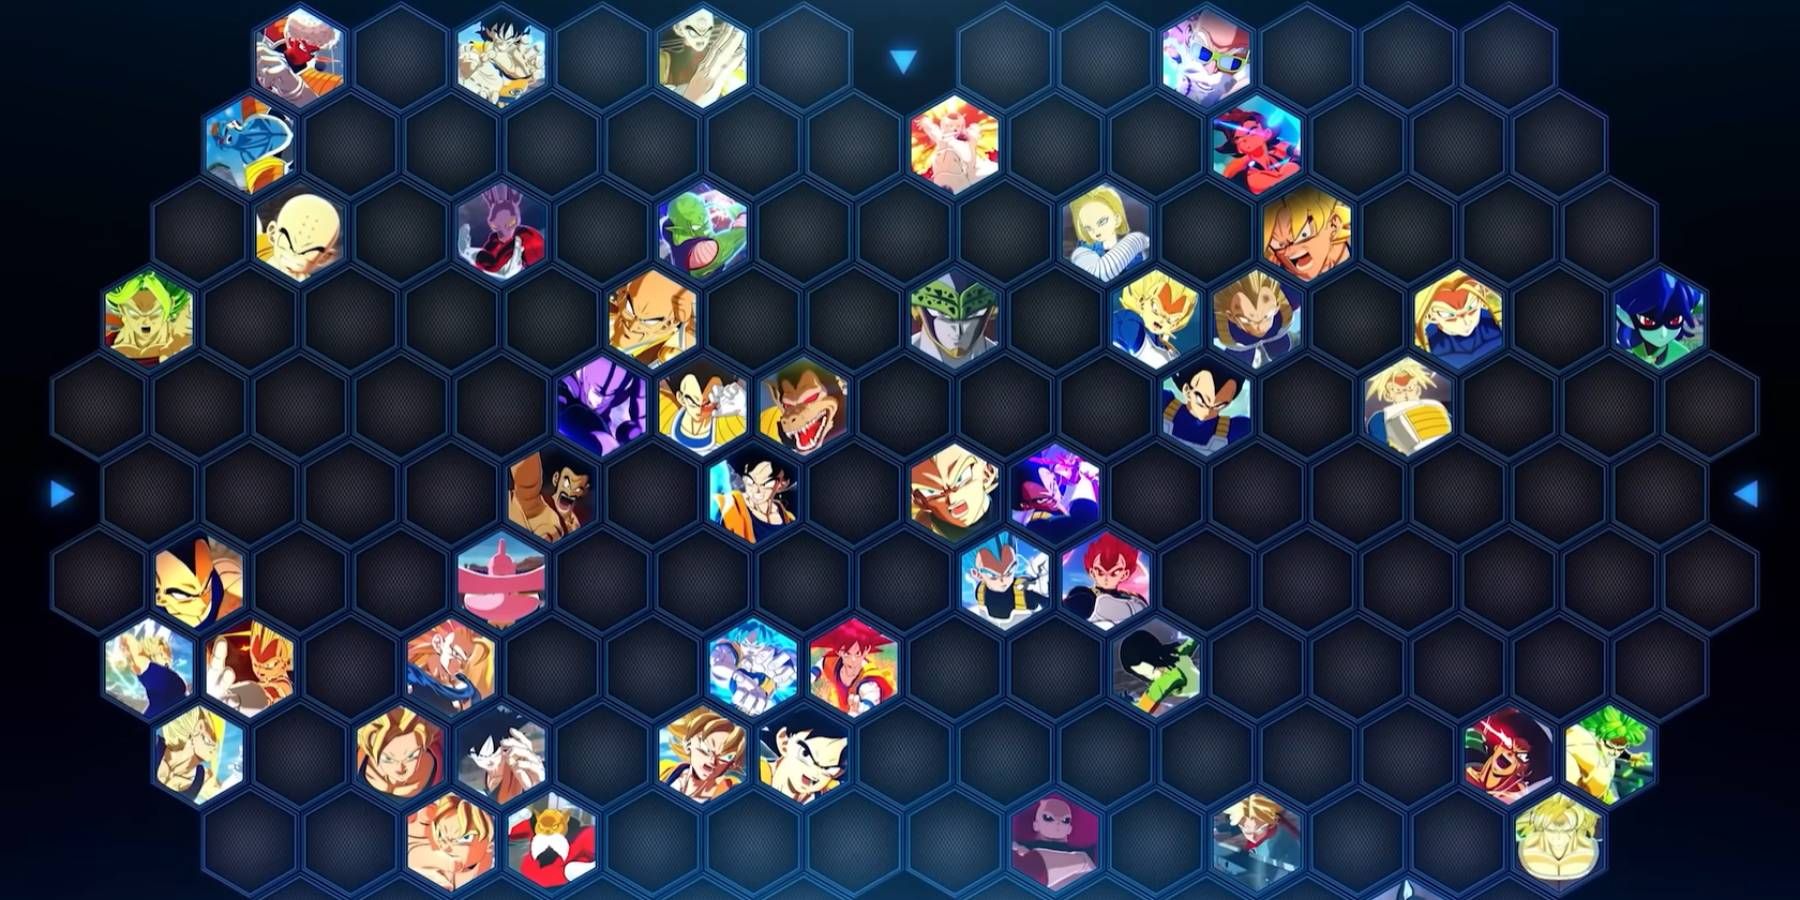 Grid of characters from the Speed vs. Power trailer for Dragon Ball: Sparking! ZERO